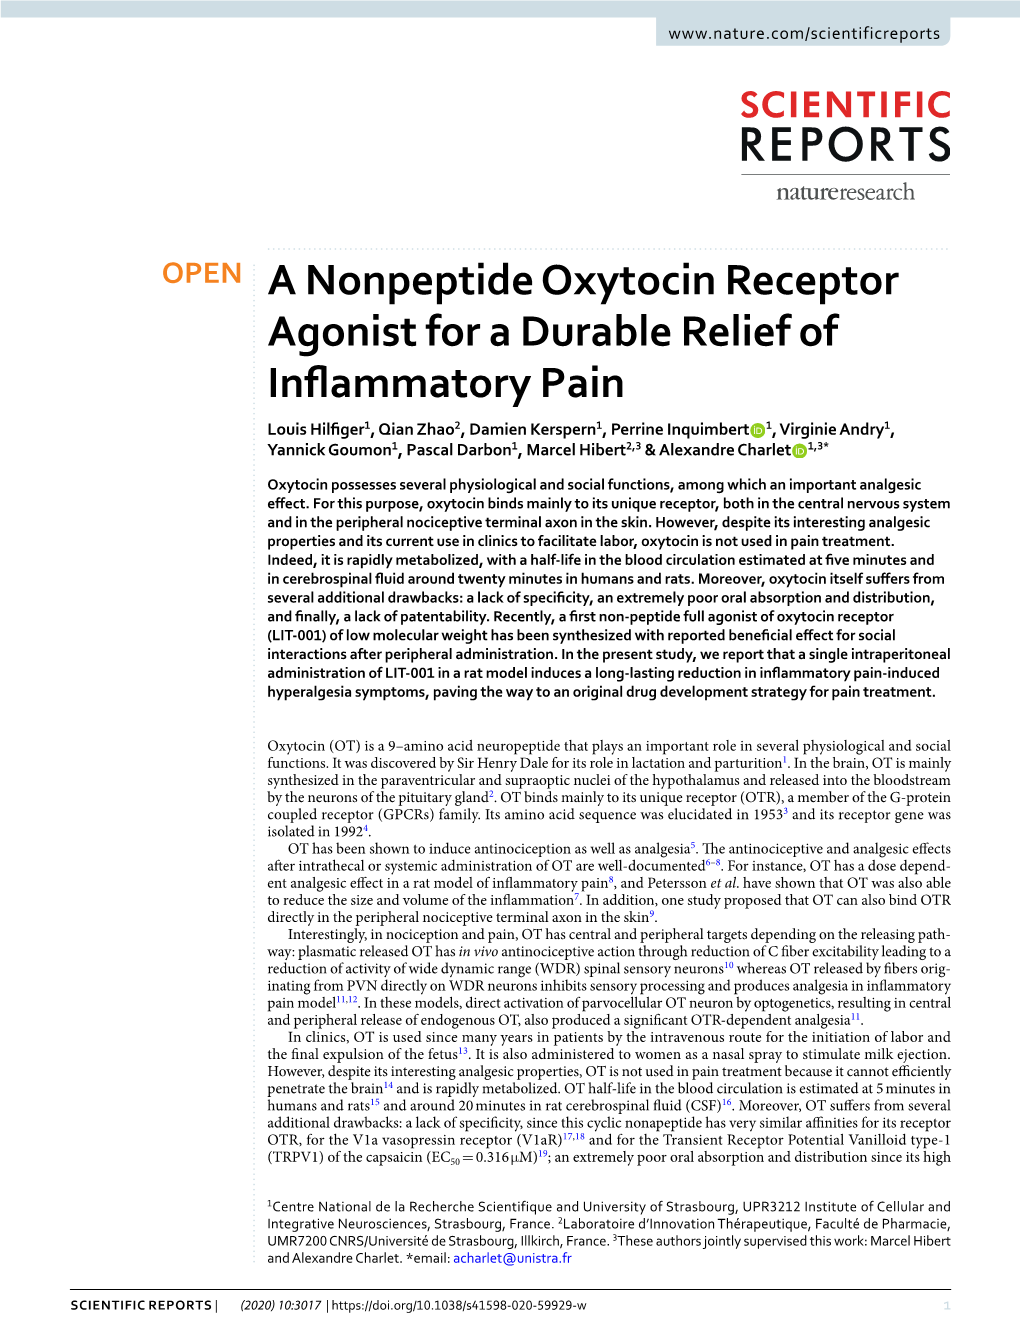 A Nonpeptide Oxytocin Receptor Agonist for a Durable Relief of Inflammatory Pain